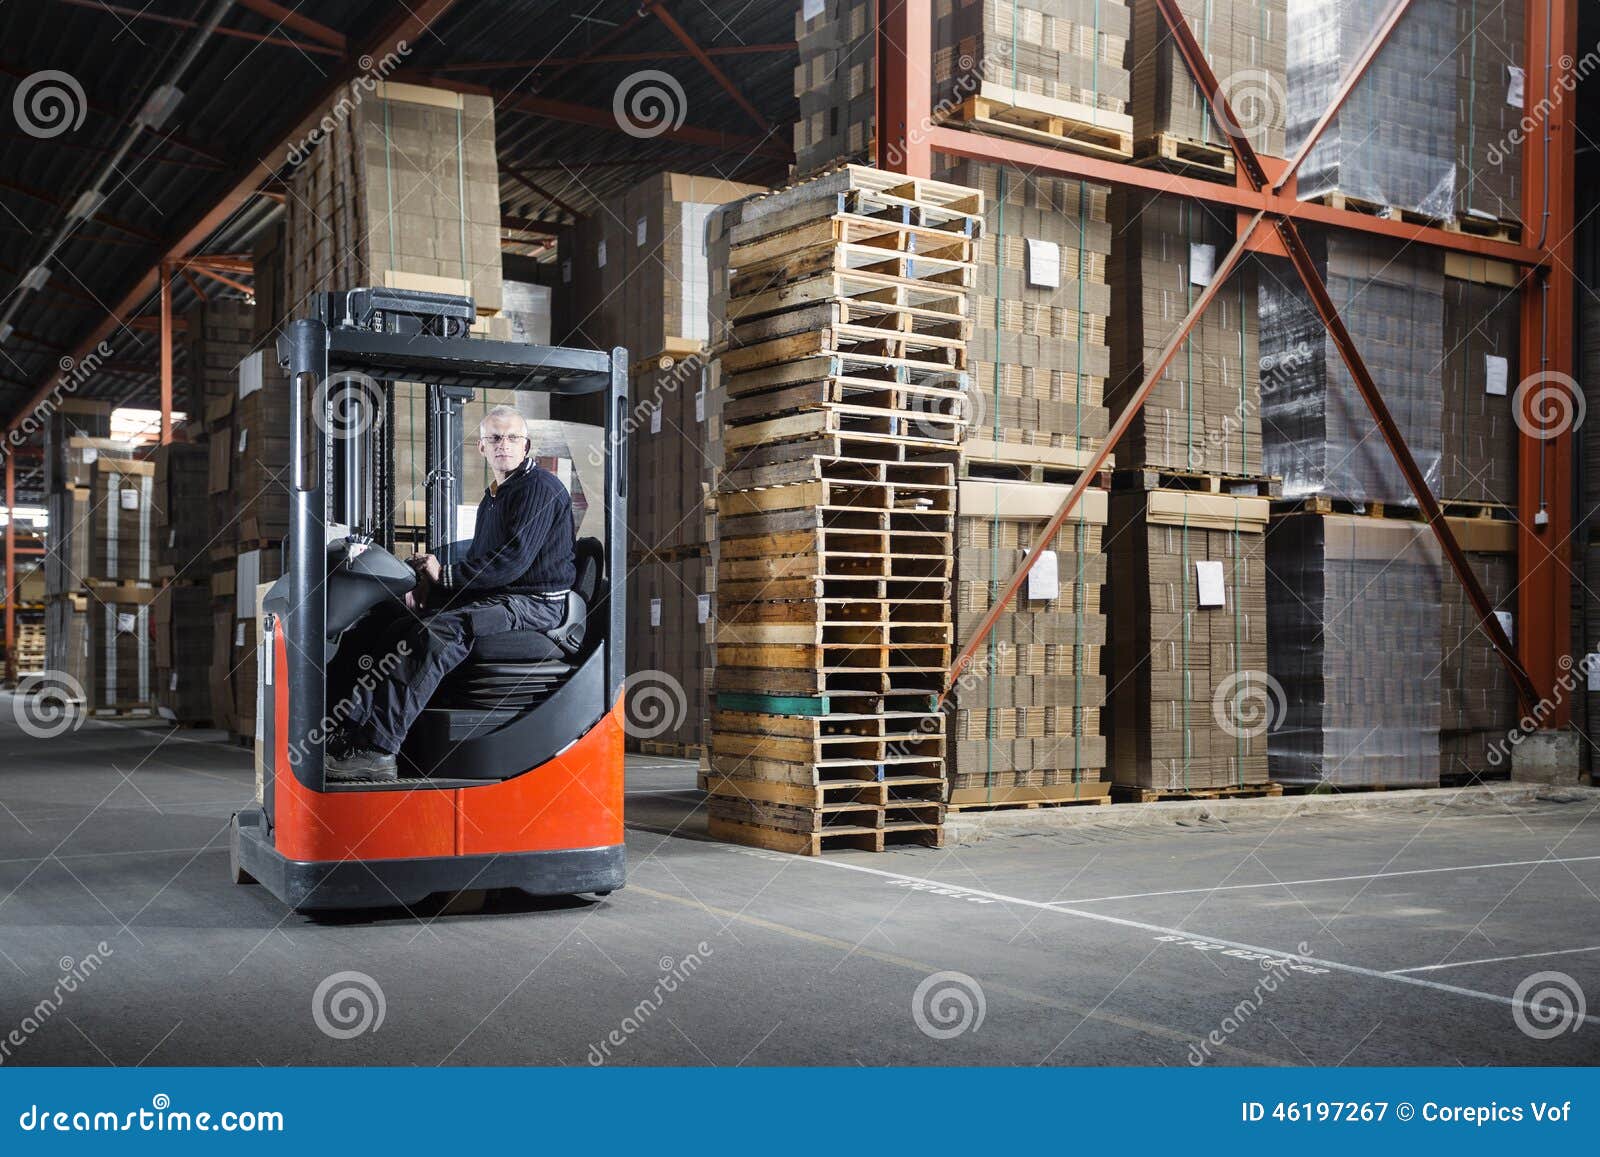 Reach Truck Driver In A Warehouse Stock Image Image Of Interior Order 46197267